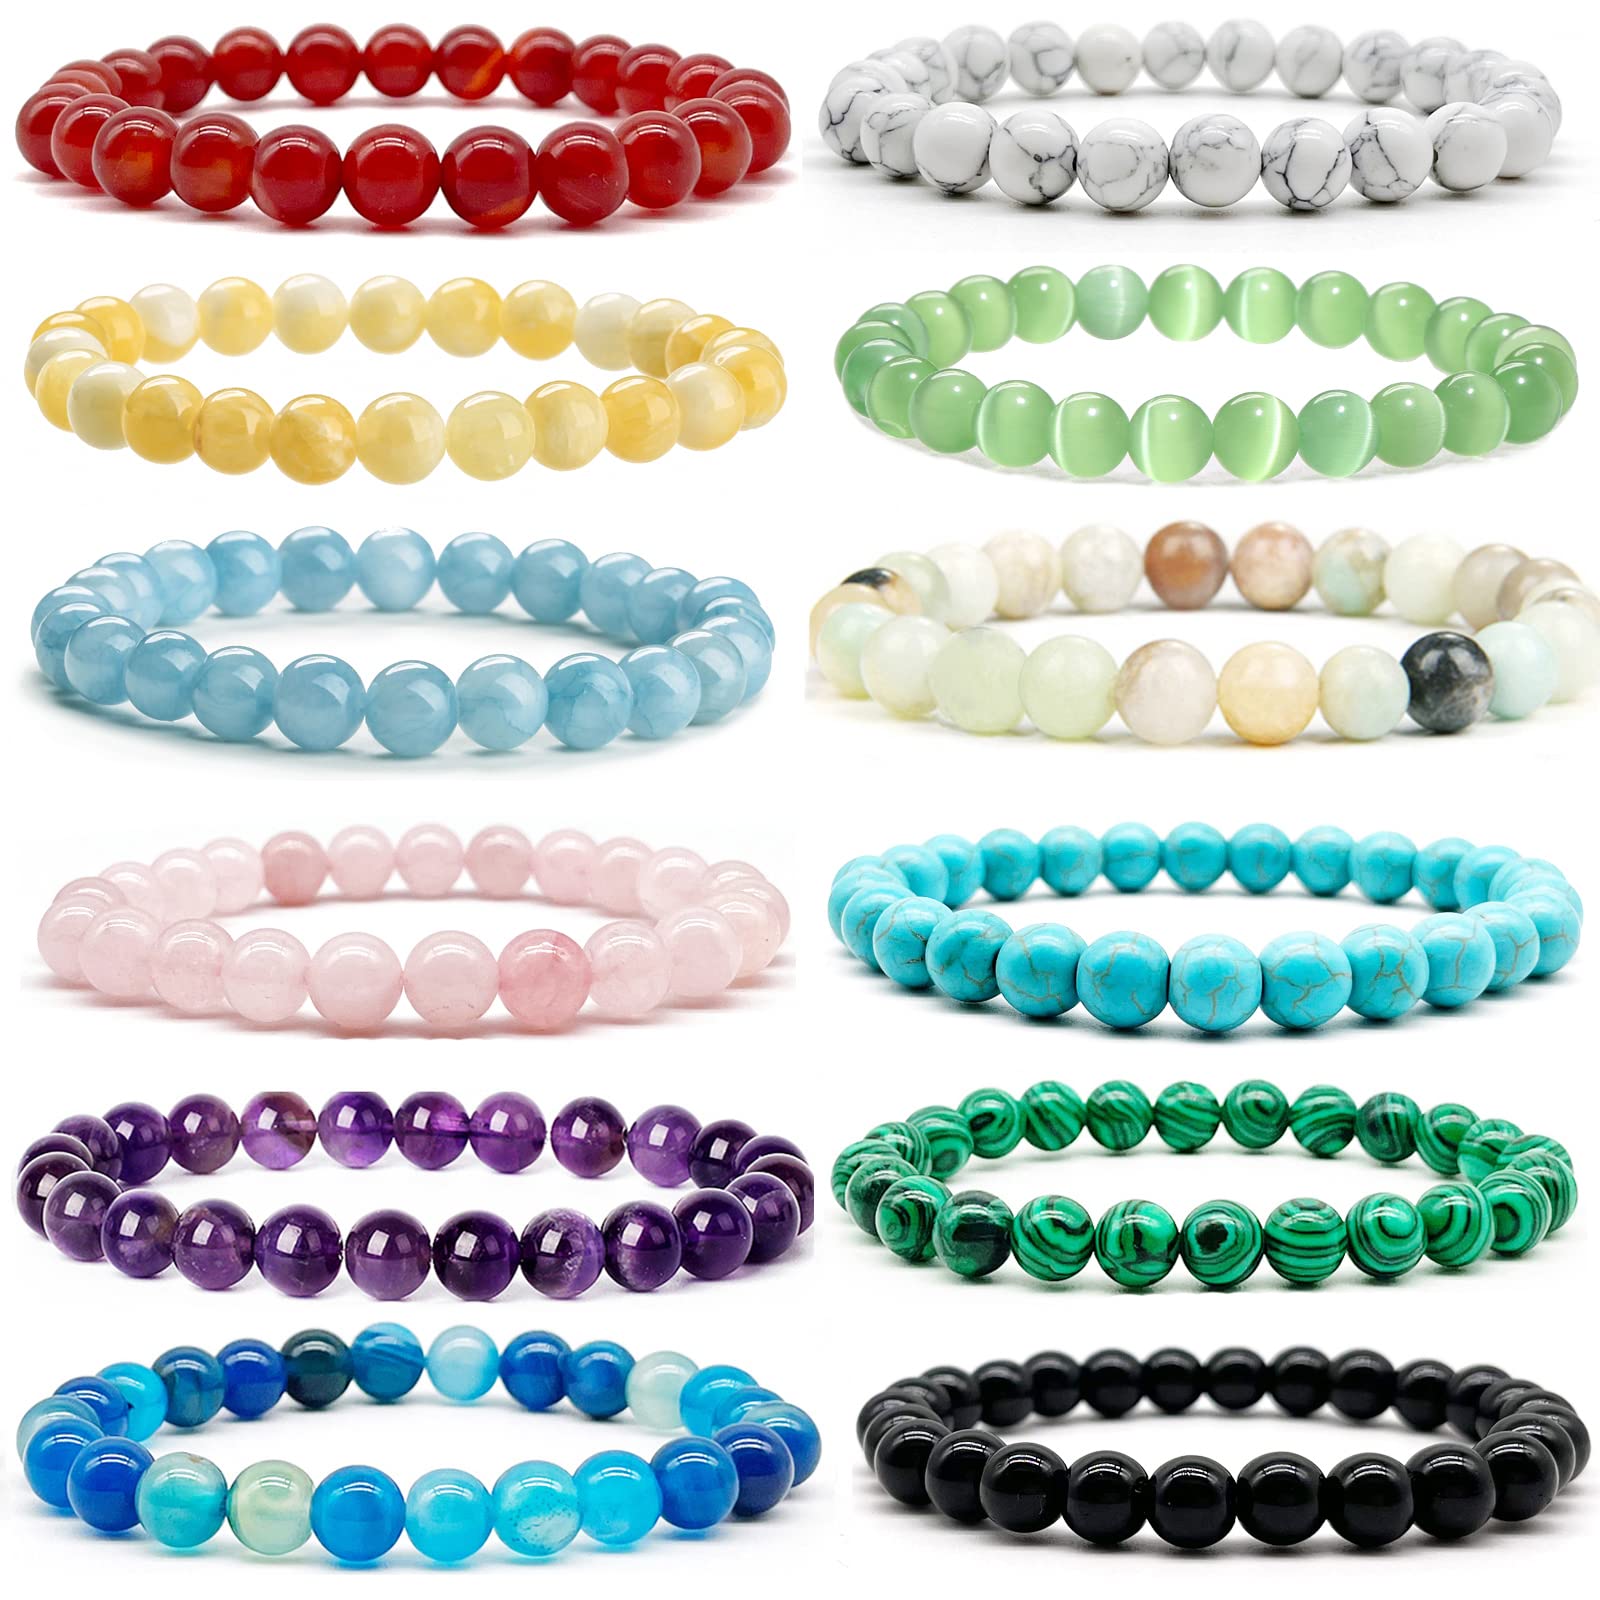 Color combos for bracelets, when it comes to creating stylish and eye-catching bracelet combinations, the possibilities are endless.